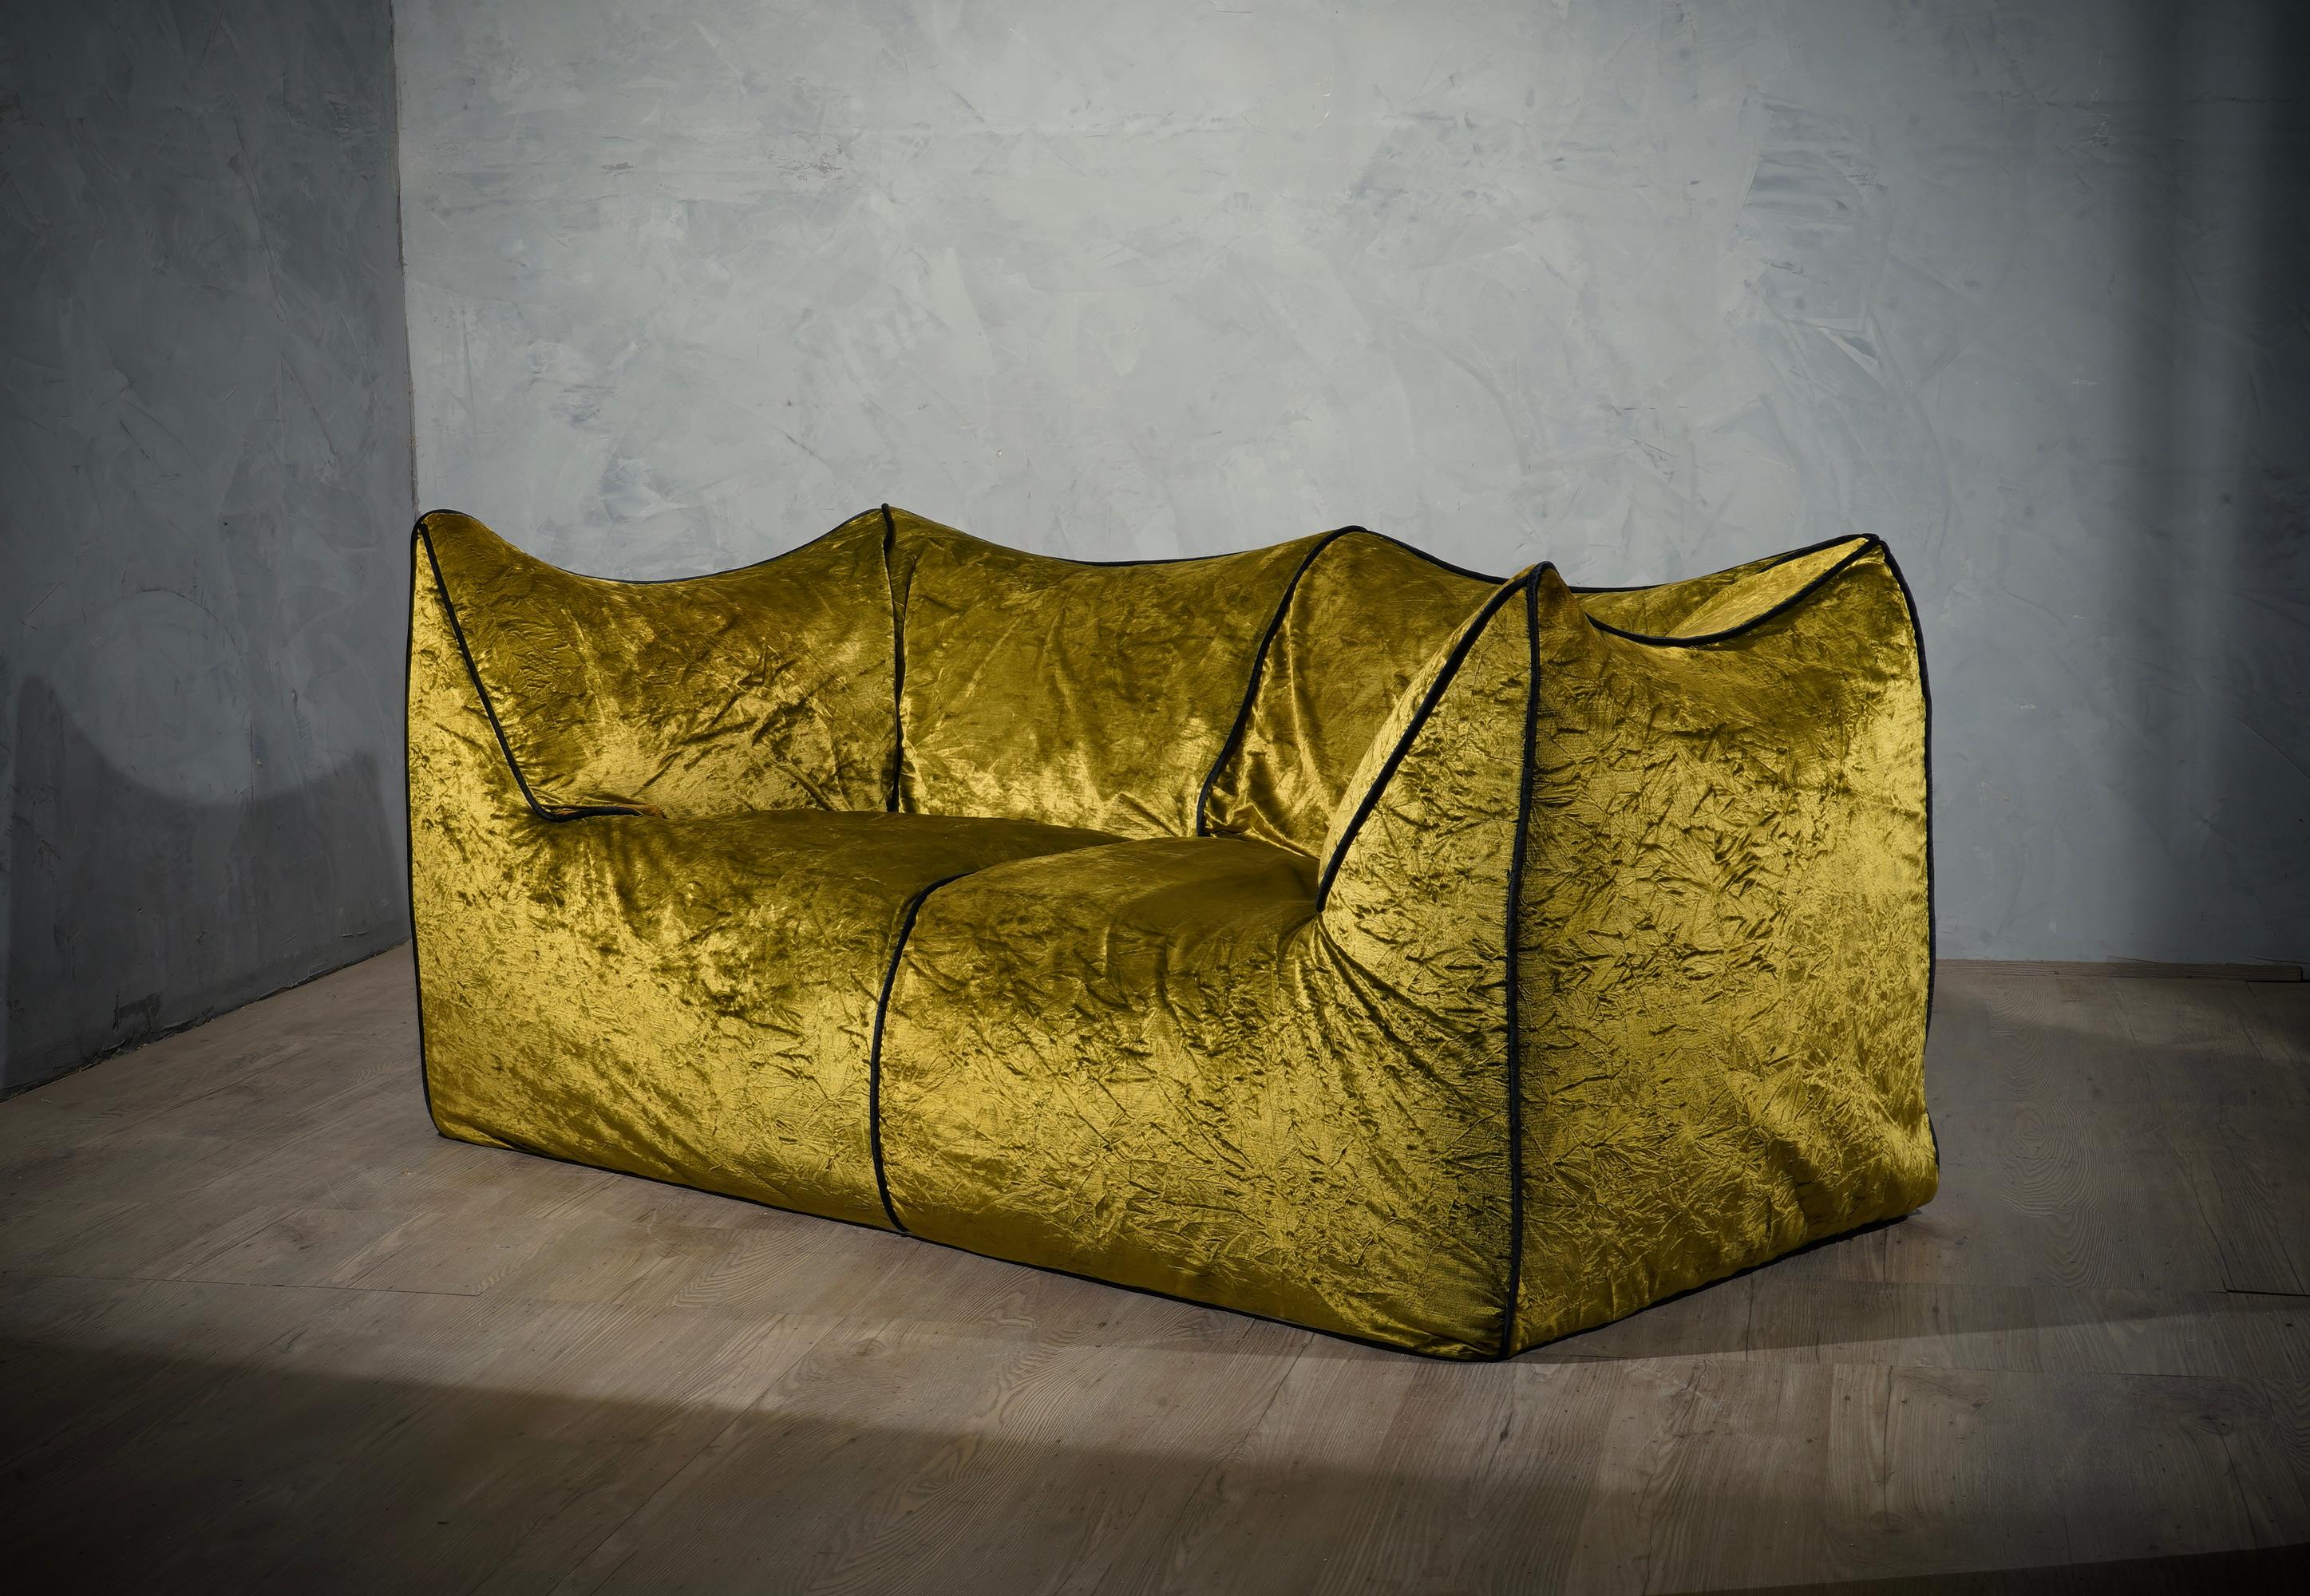 Surprising design for a sofa produced in a period of predilection for extreme and unique shape, covered with a sumptuous green velvet fabric,
with a cord covered in black velvet as a finishing.

Stunning ‘Le Bambole’ two-seat sofa by Mario Bellini